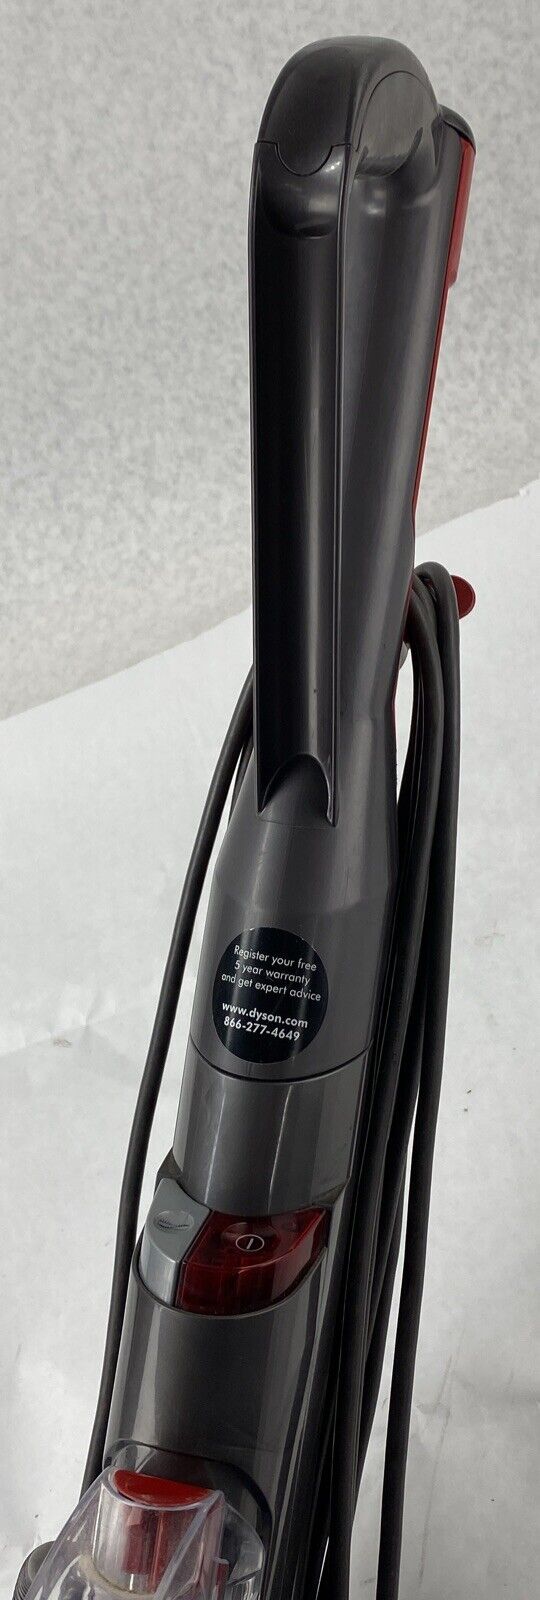 Dyson DC65 Upright Bagless Vacuum Cleaner FOR PARTS UNRESPONSIVE FLOOR BRUSH